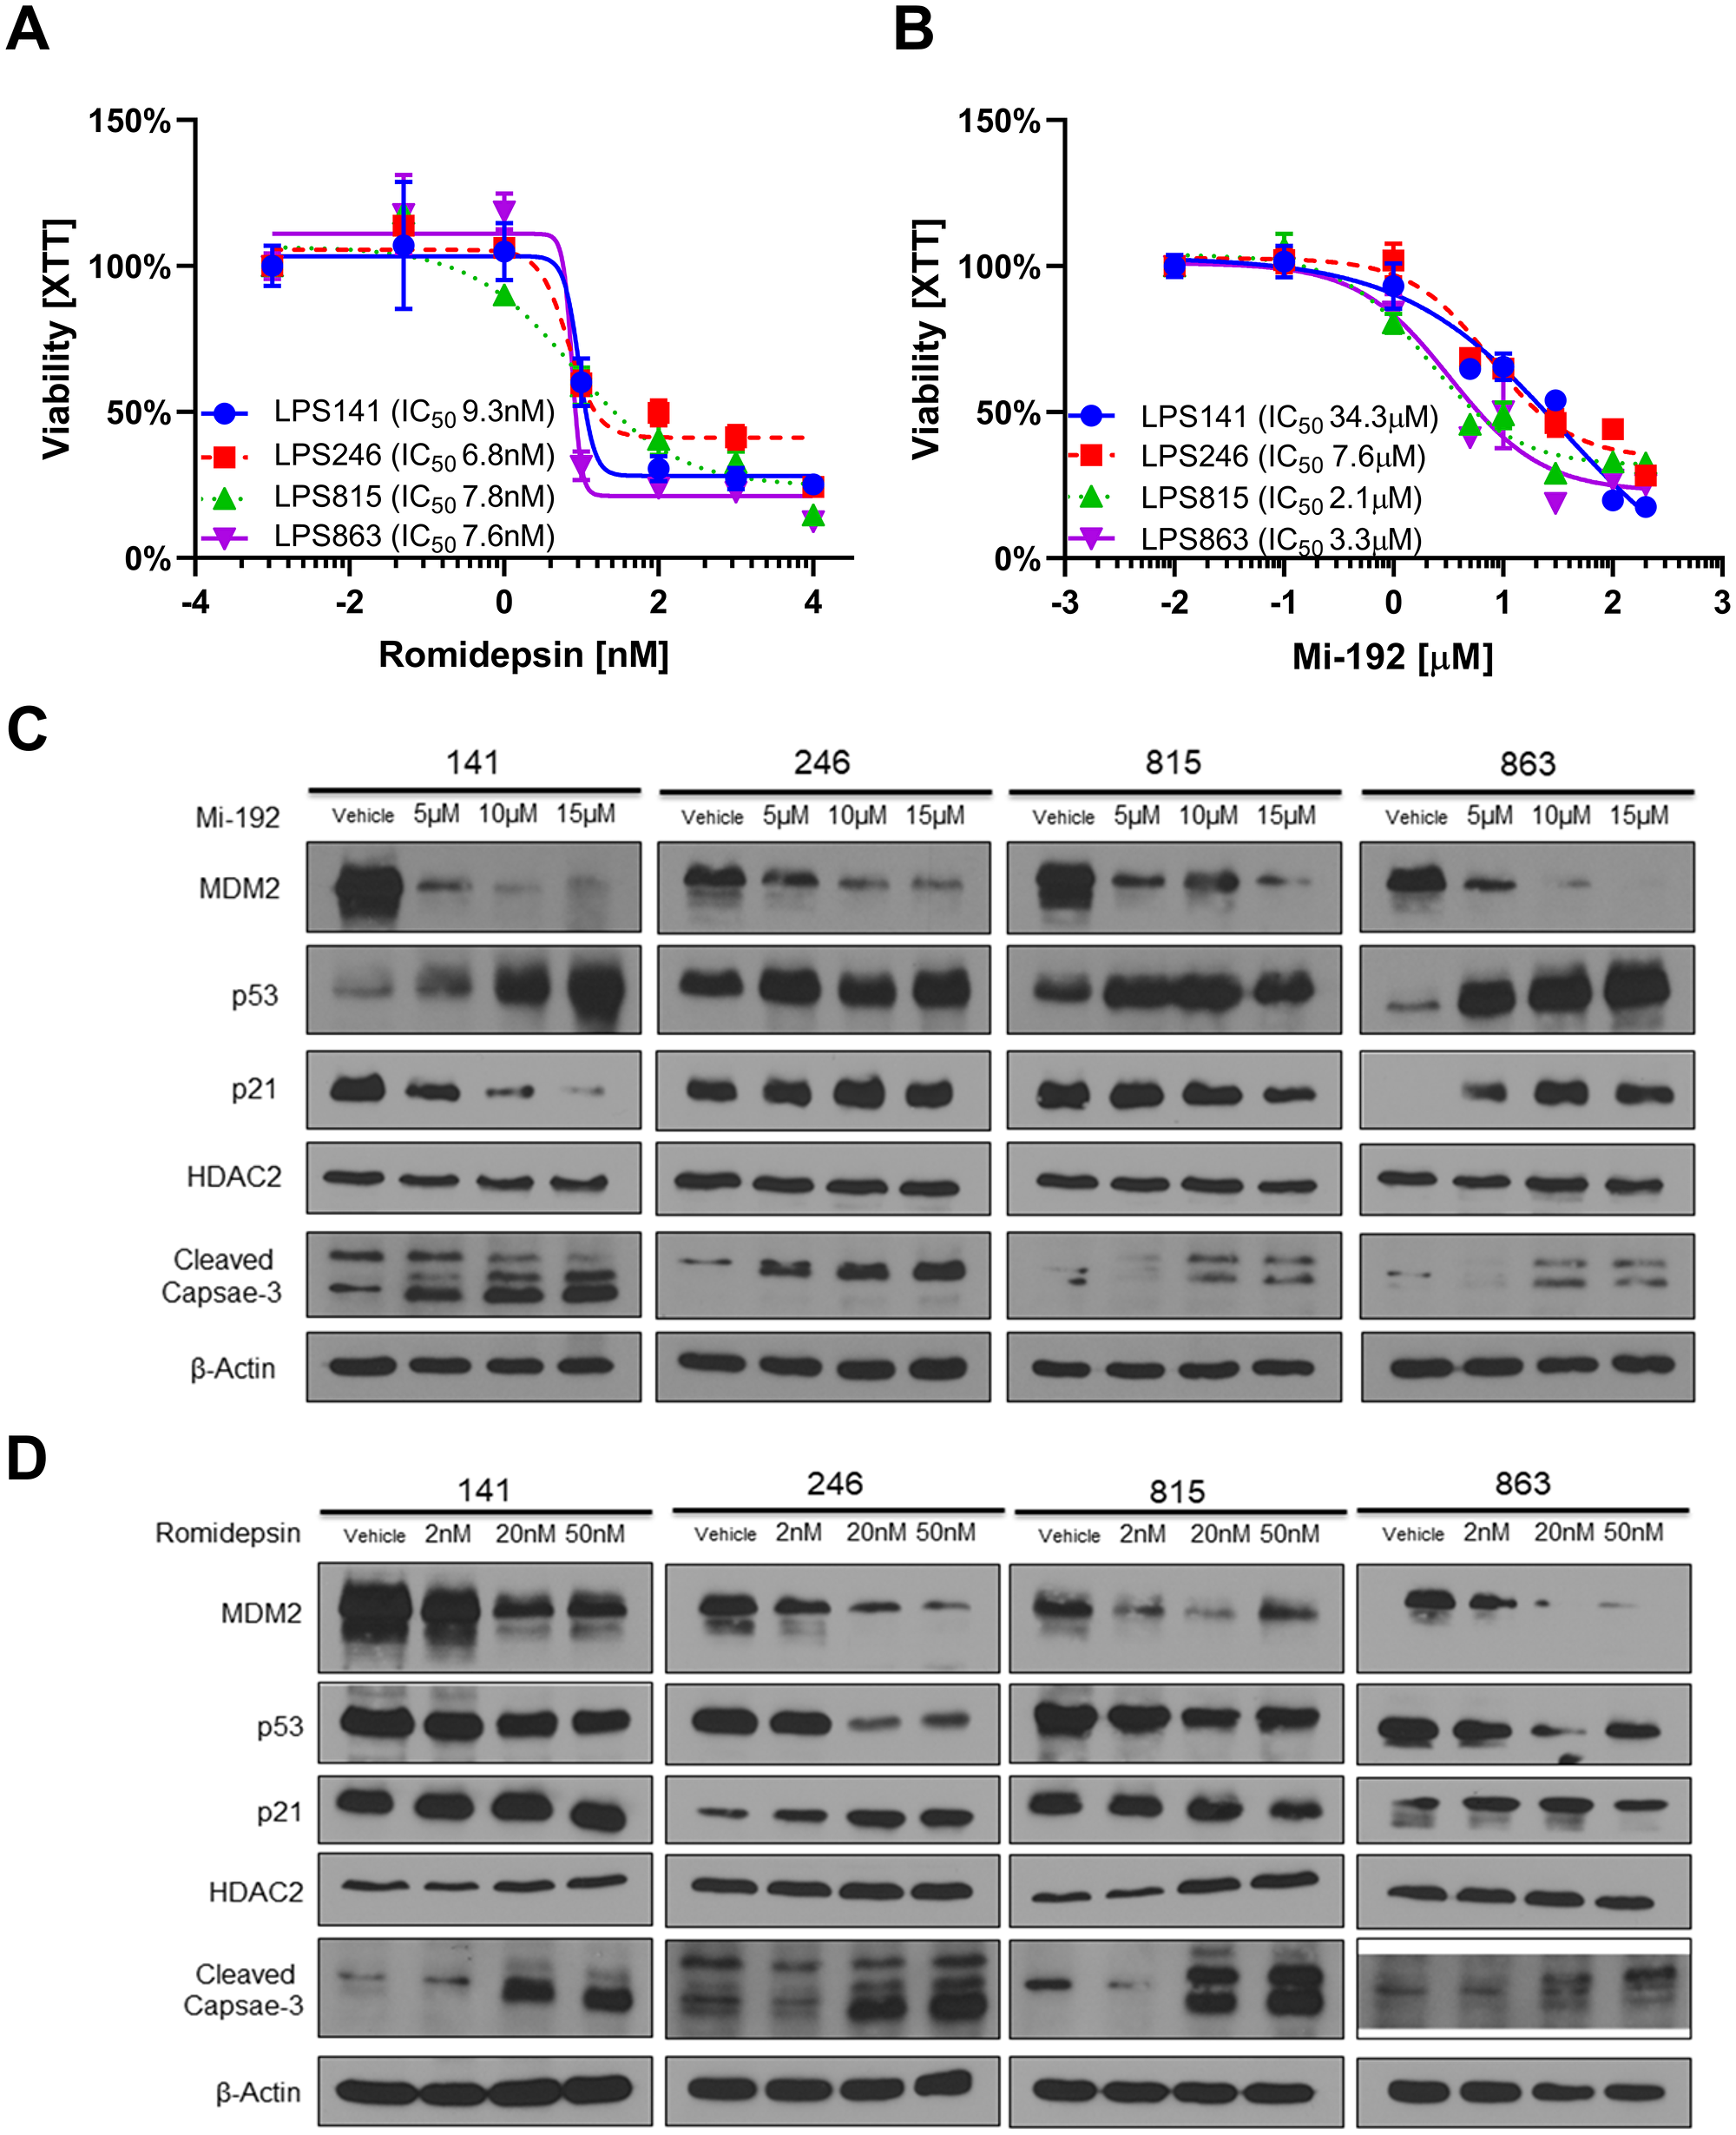 HDAC2 inhibitors reduce MDM2 expression in in vitro models of DDLPS.